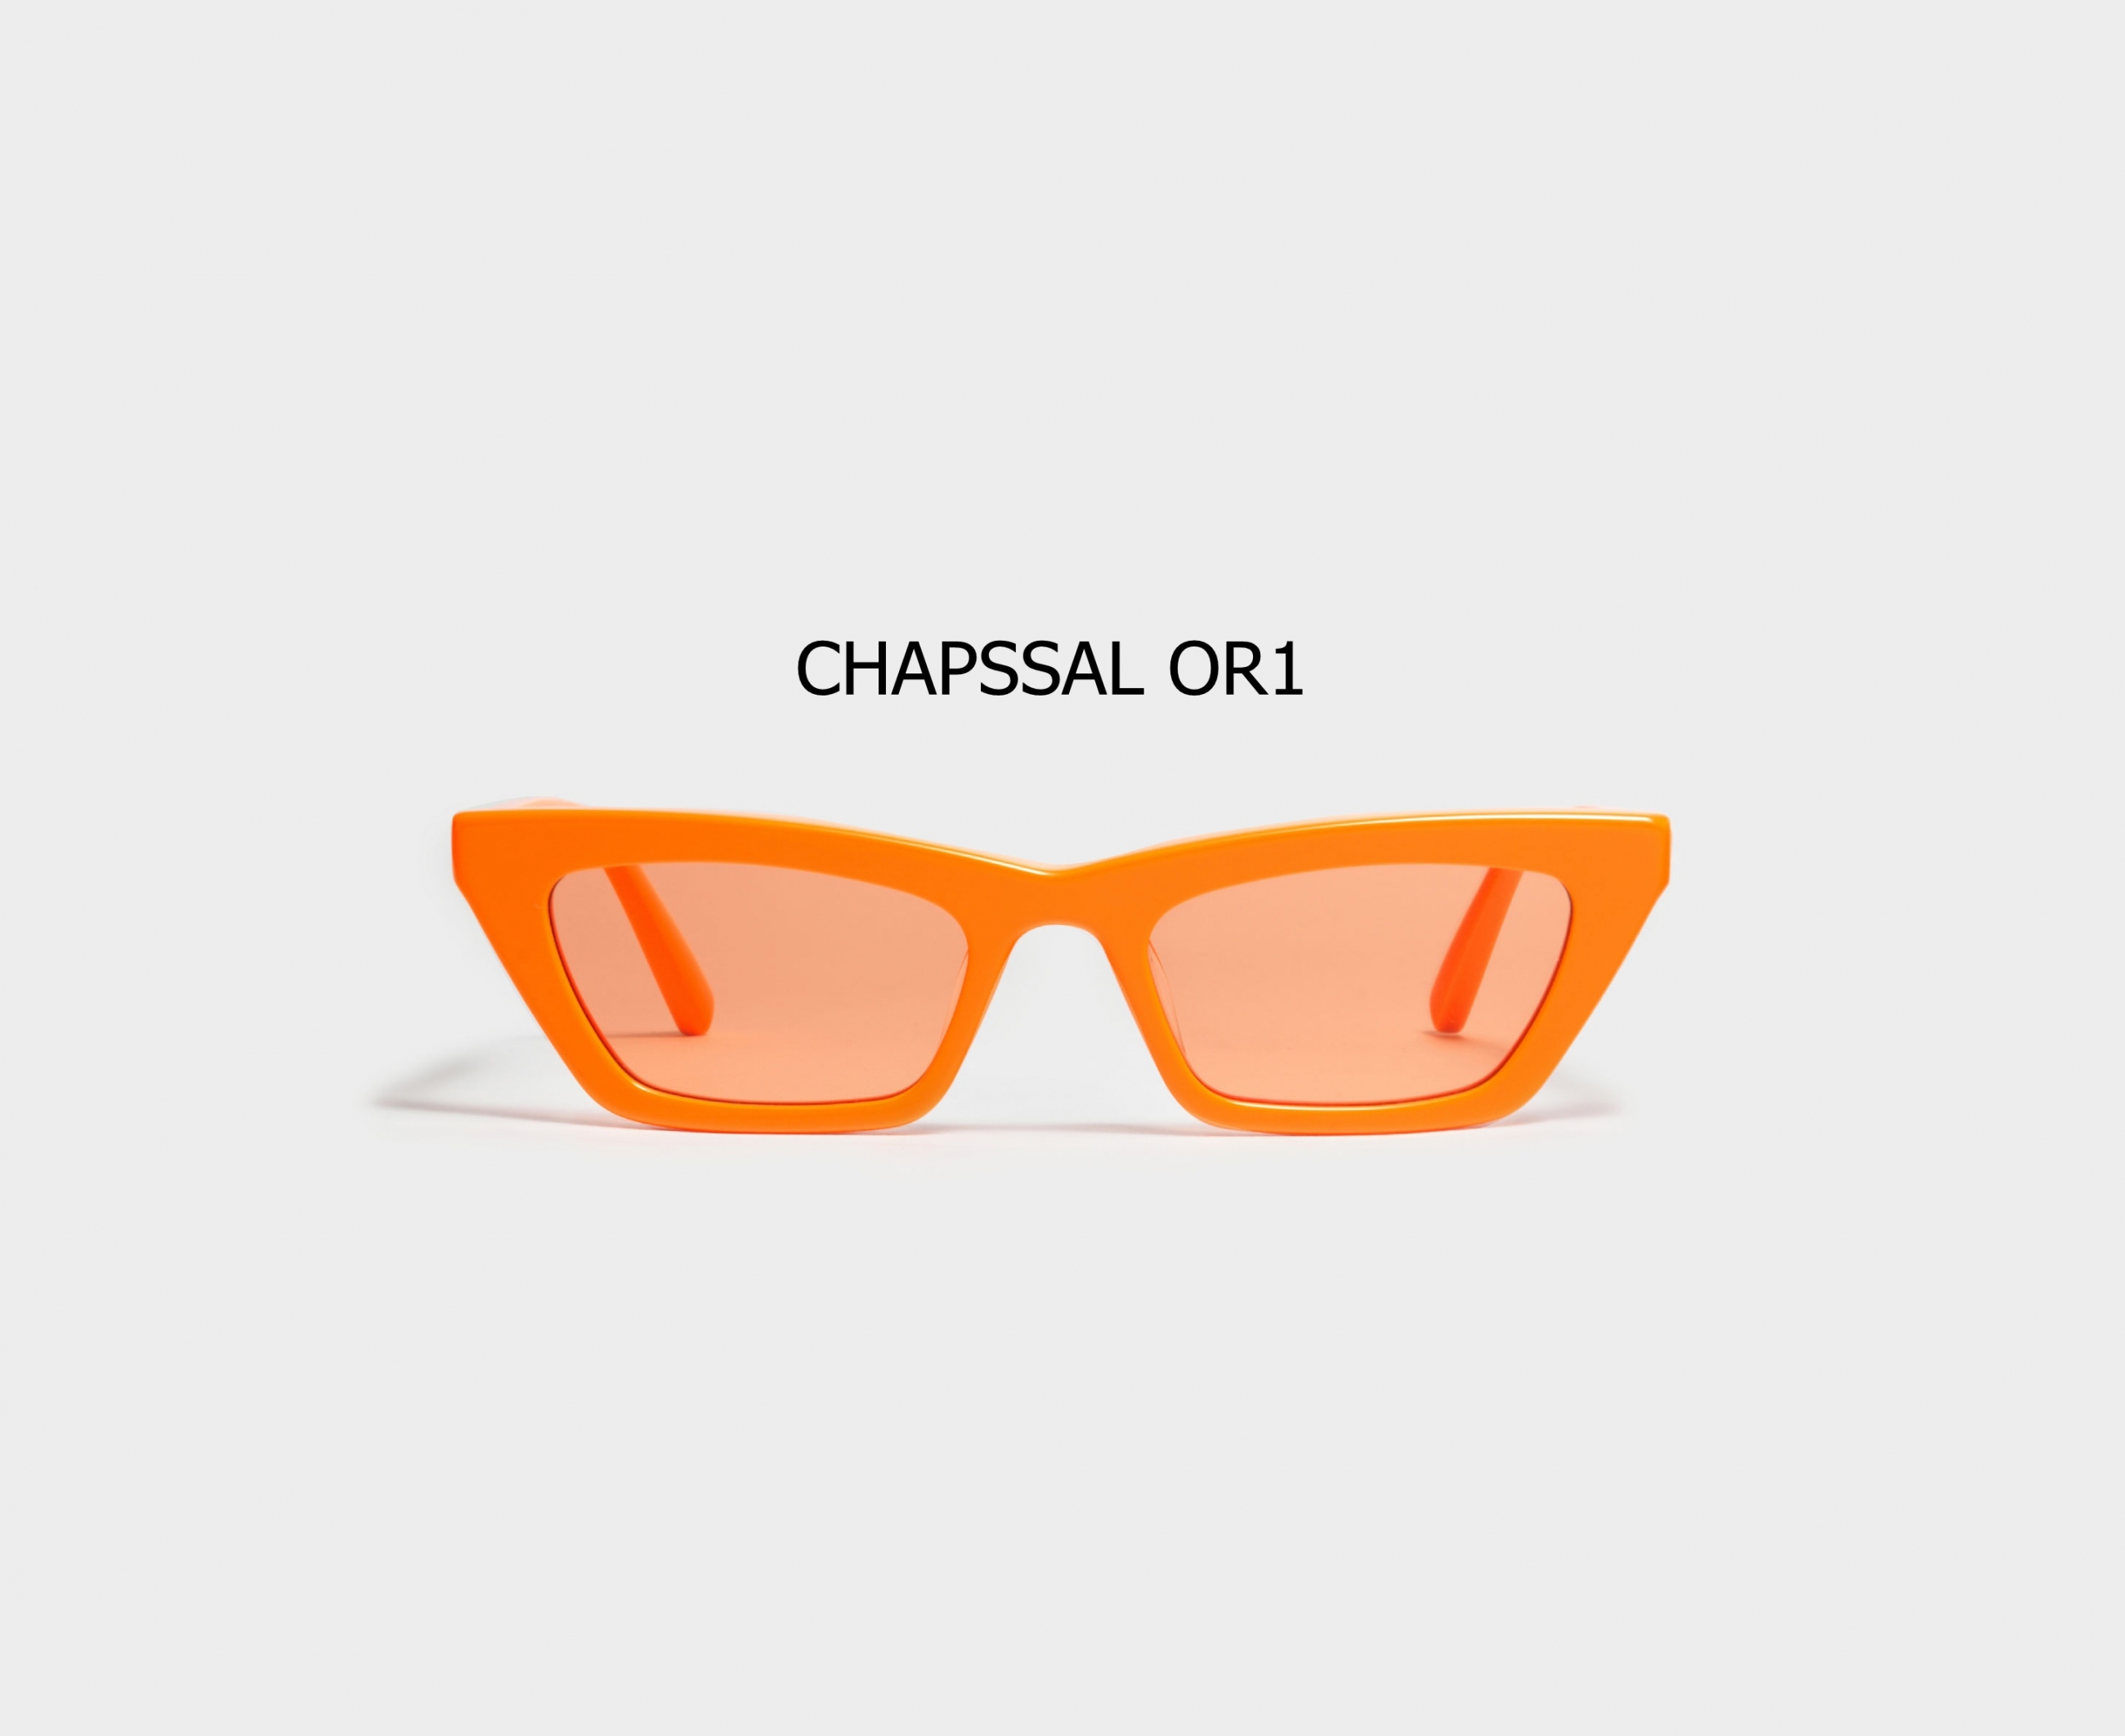 CHAPSSAL_OR1_01